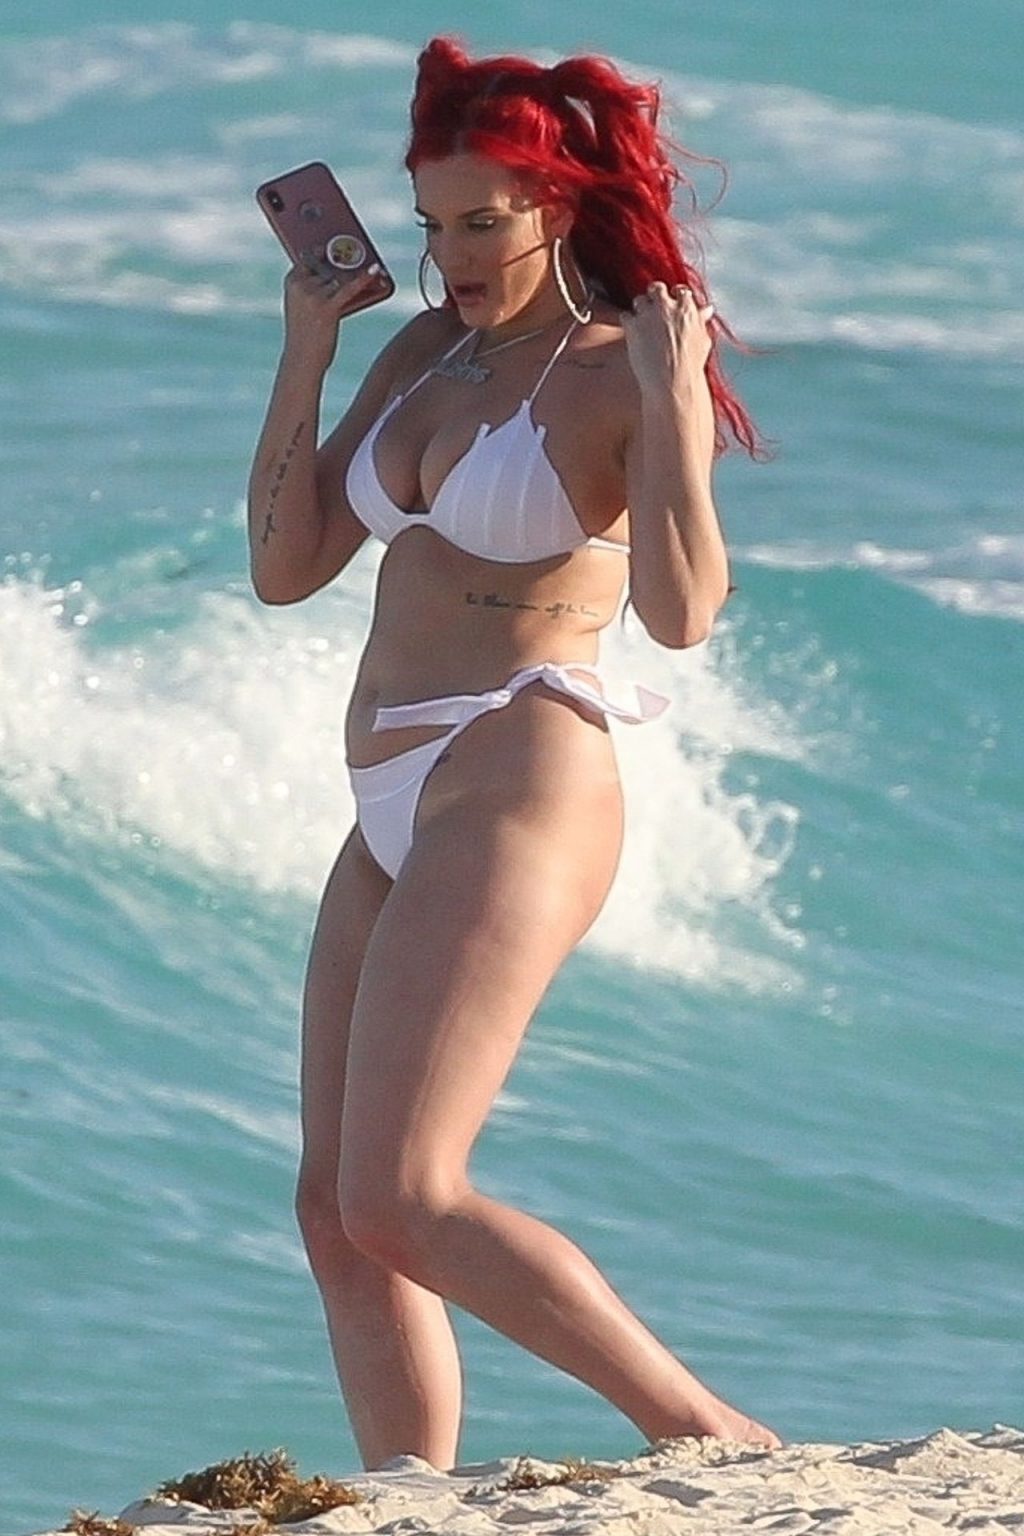 Justina Valentine – The Fappening. 2014-2022 celebrity photo leaks!